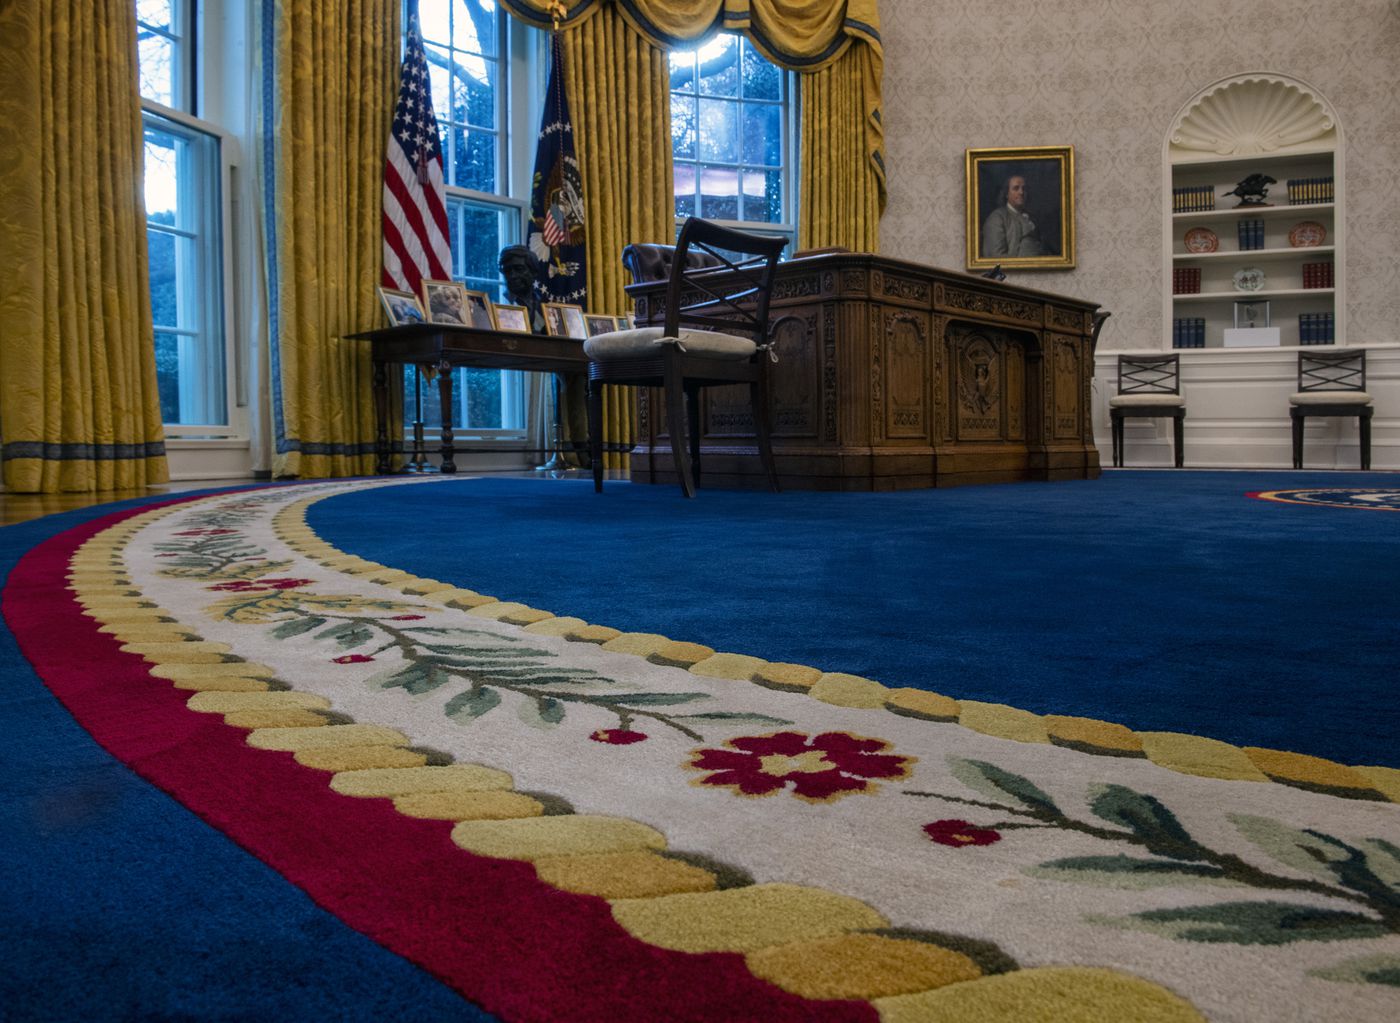 A floor view of the Resolute desk in the redesigned Oval Office awaiting President Joe Biden at the White House in Washington, D.C.